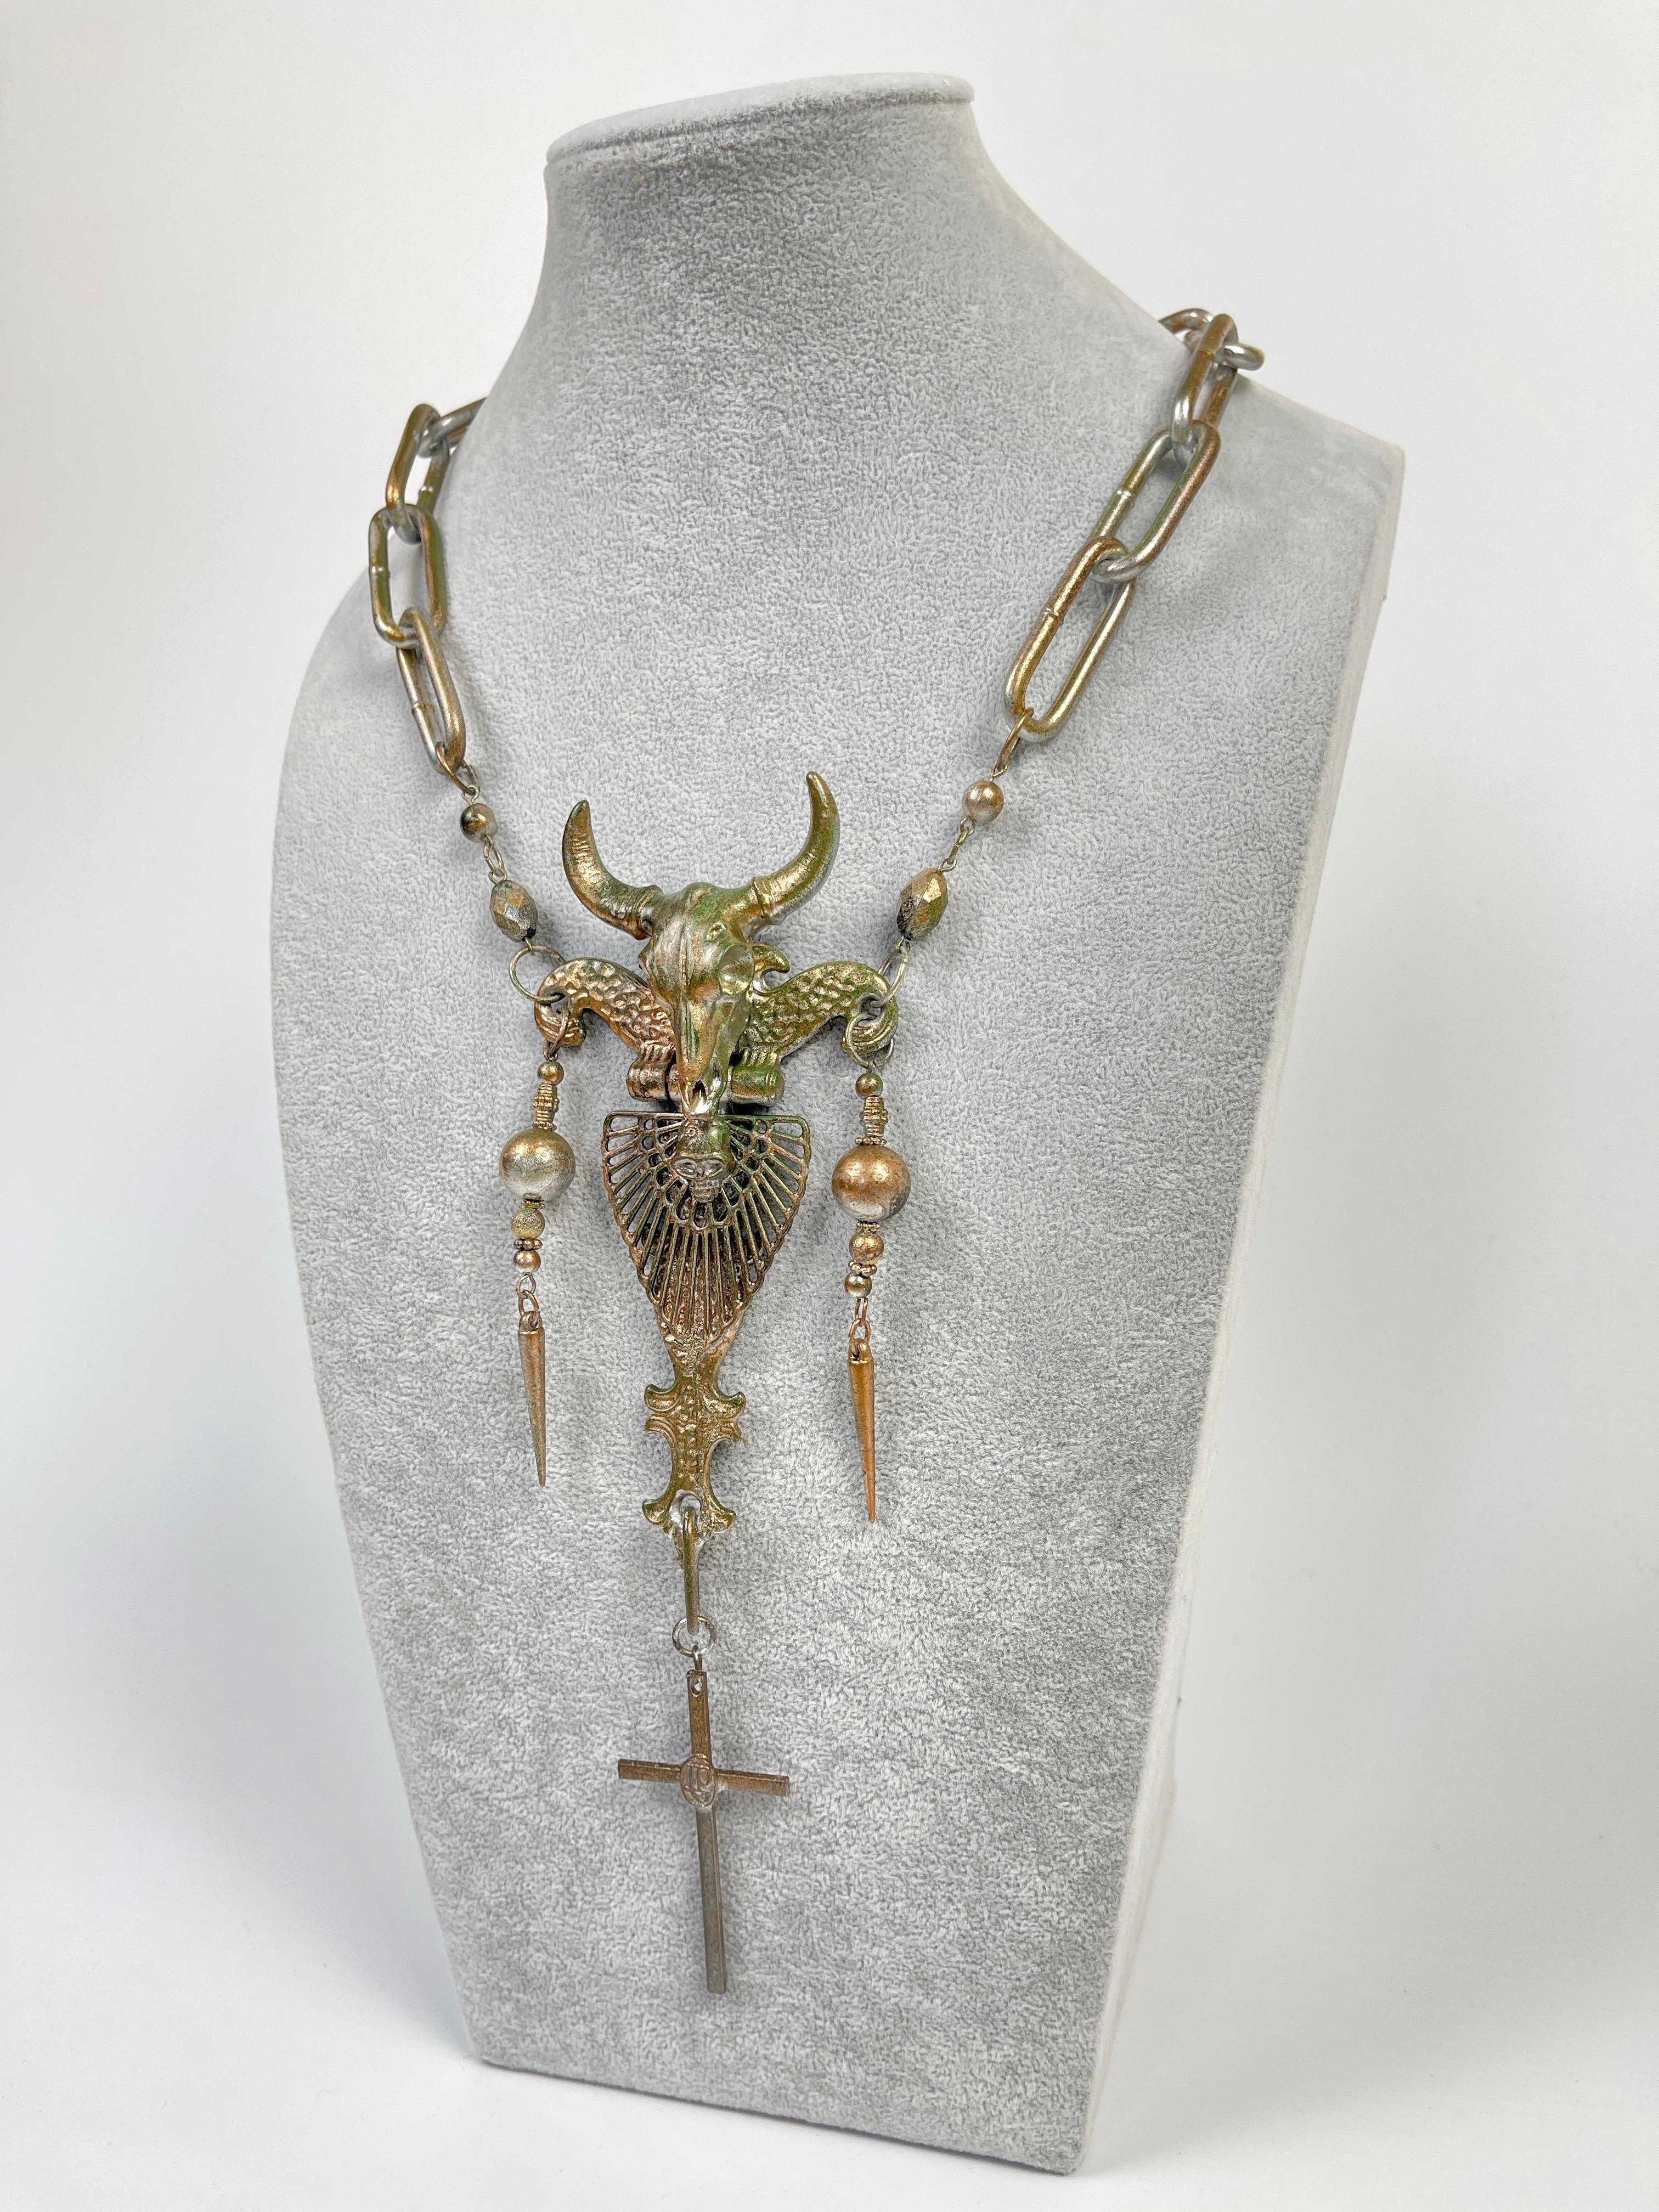 Jean Paul Gaultier 1990's Staff Sample Rosario Bull Necklace For Sale 9